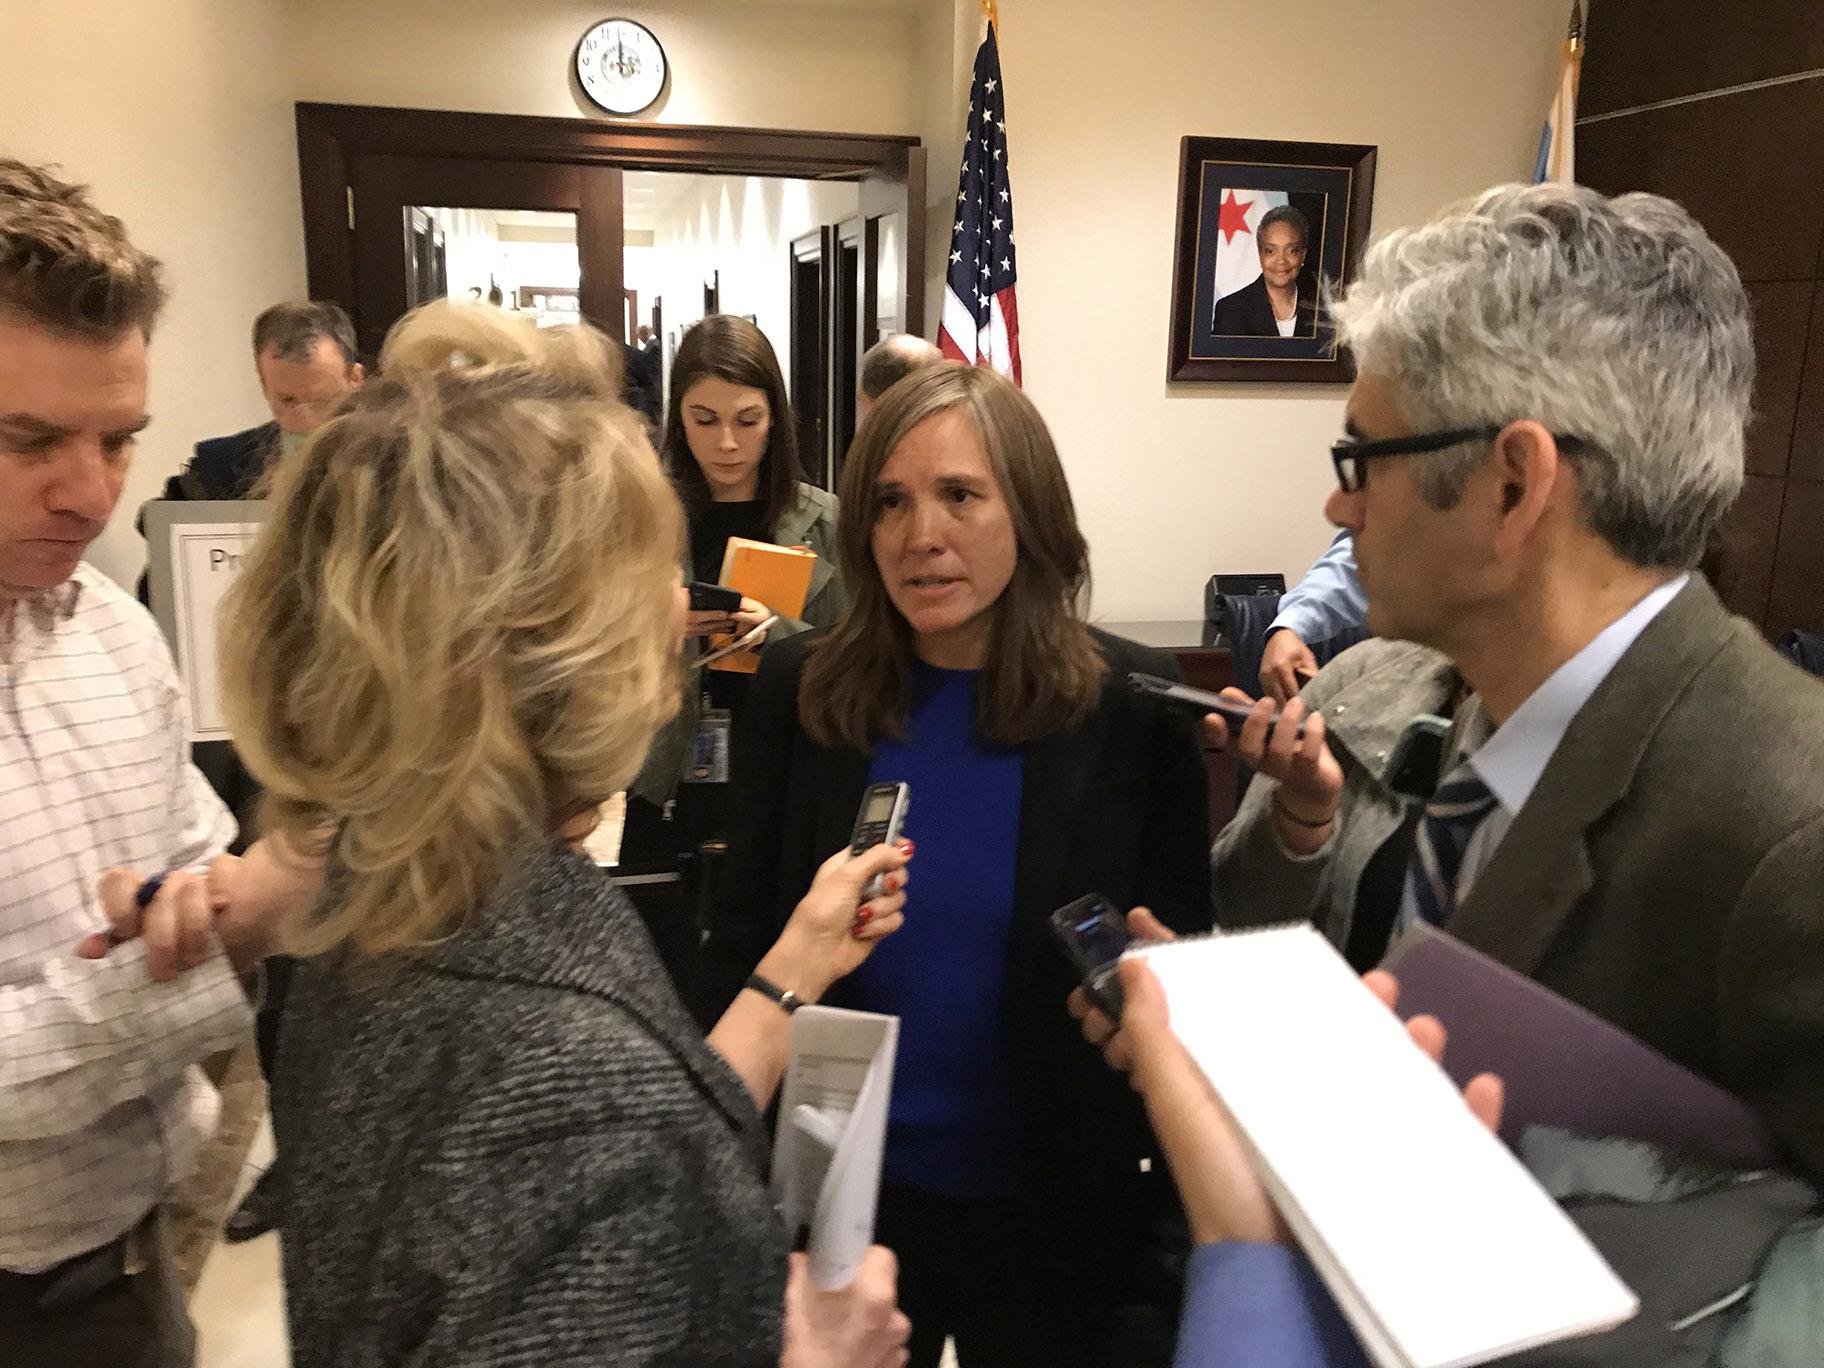 Presumptive Chicago Department of Transportation Commissioner Gia Biagi speaks with reporters at City Hall after the City Council’s Transportation Committee advanced her nomination on Tuesday, Jan. 7, 2020. (Nick Blumberg / WTTW News)